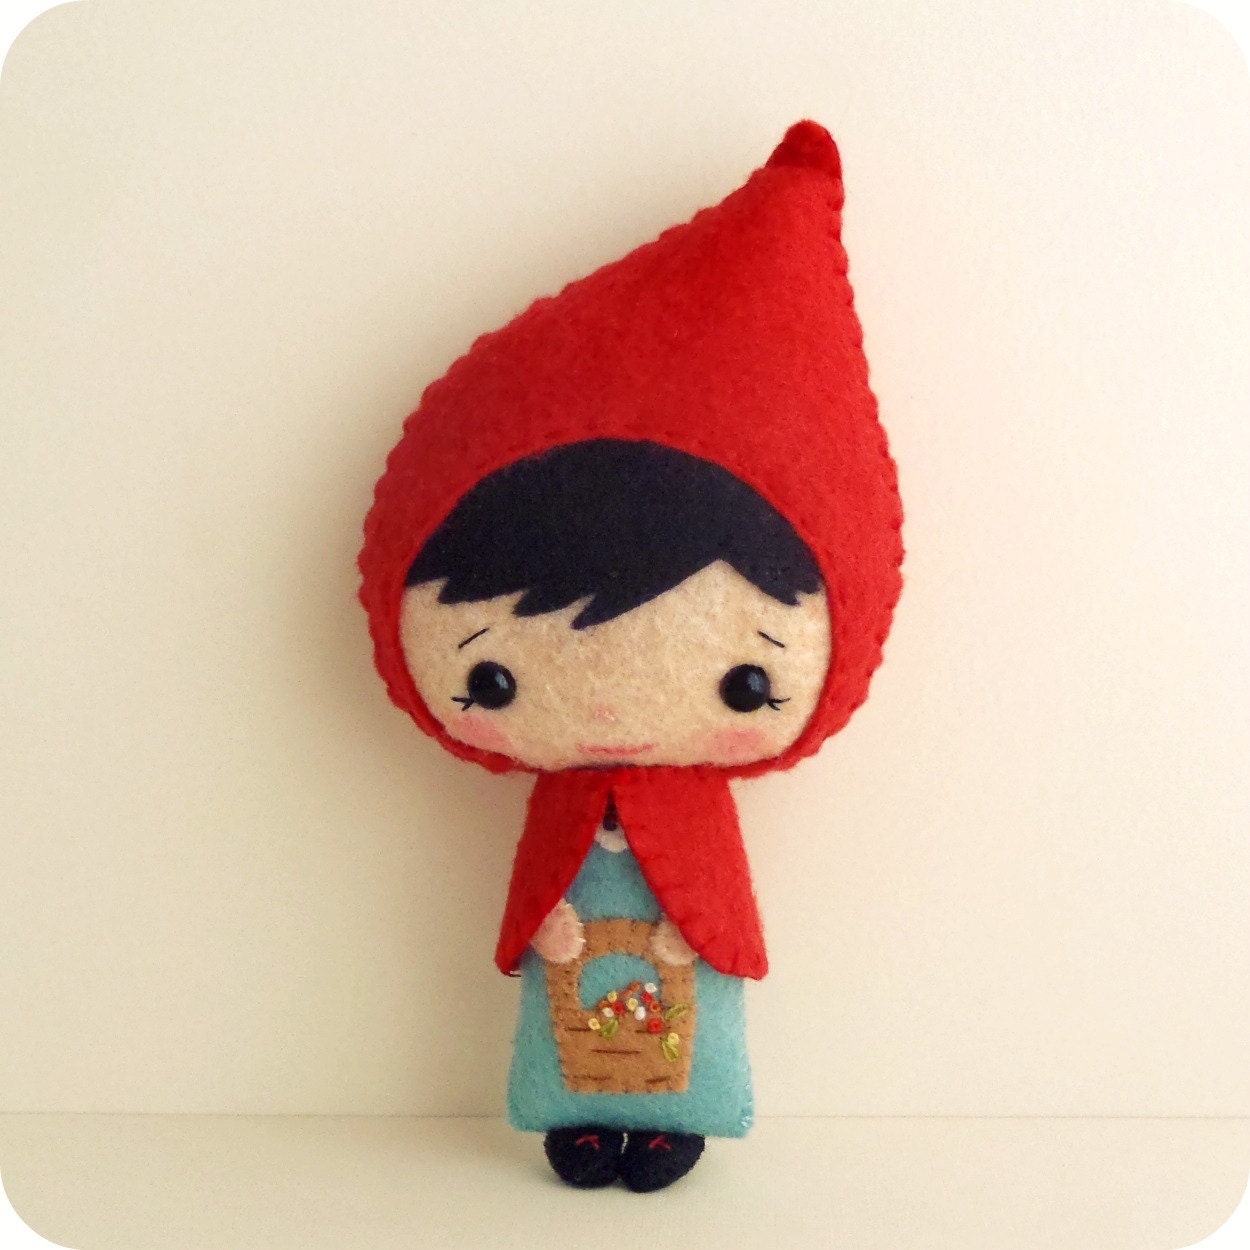 Little Red Riding Hood pdf Pattern - Instant Download